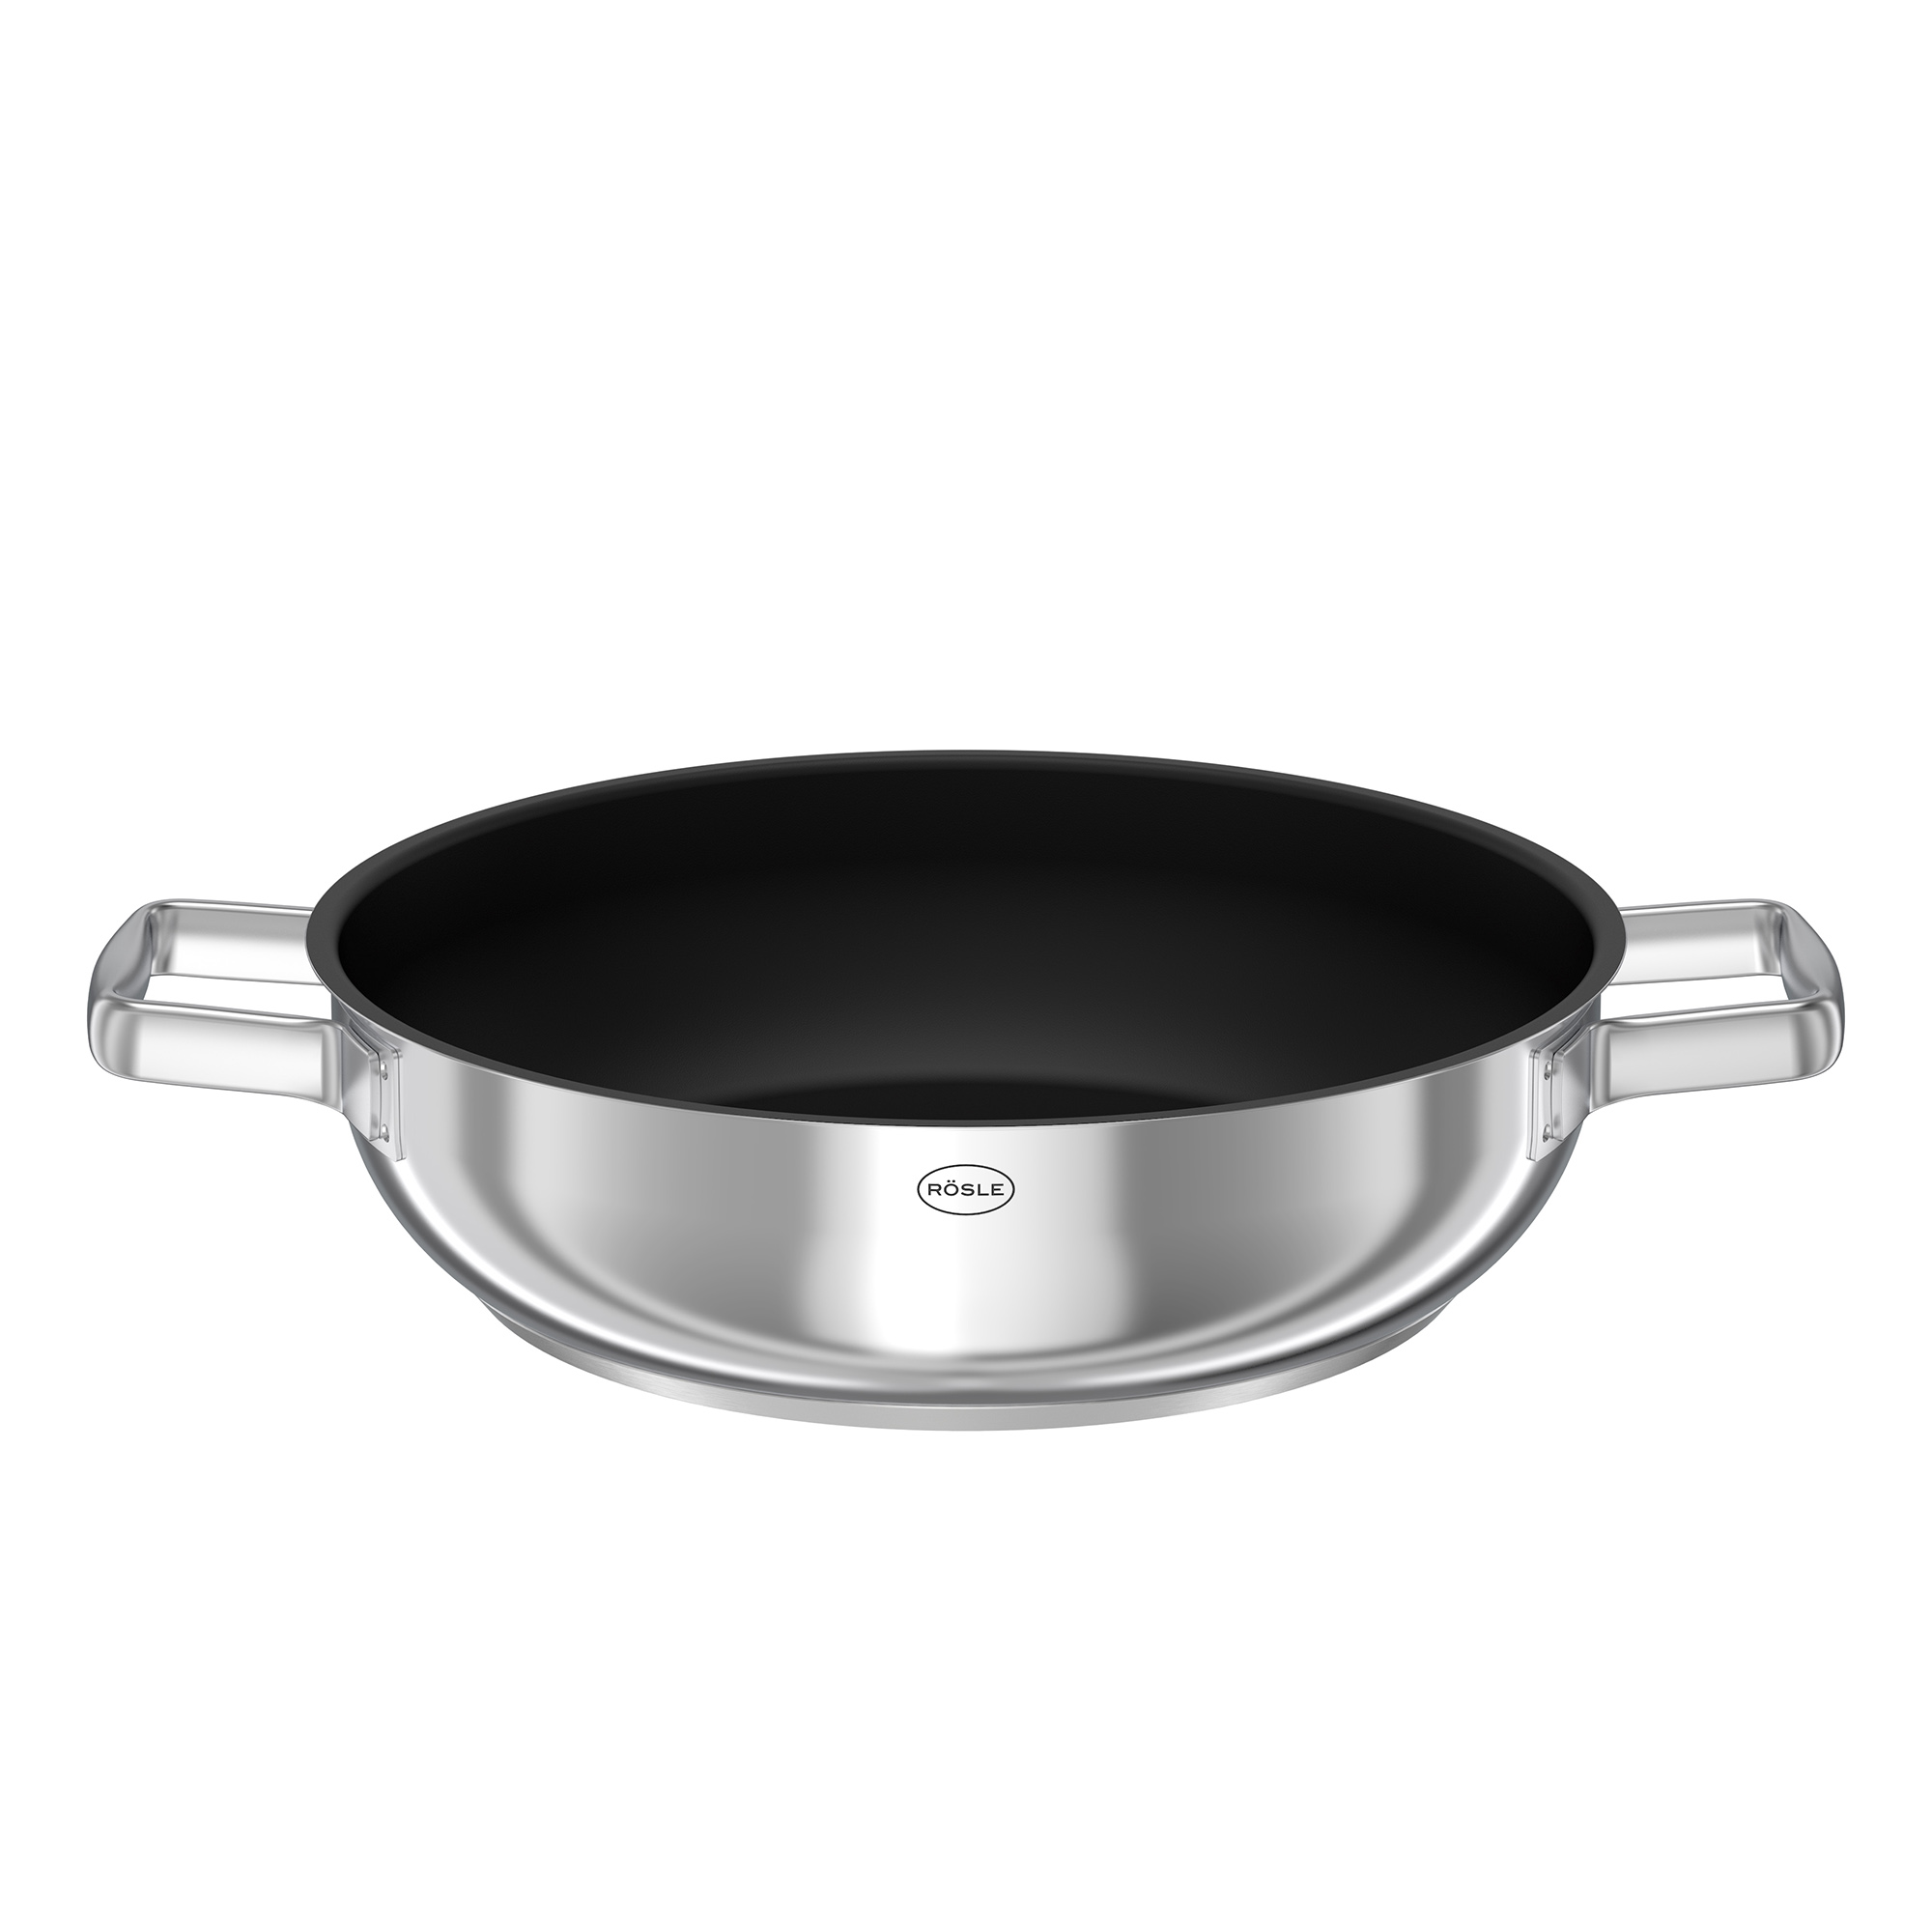 Serving Pan MOMENTS Ø 28 cm|11.0 in. PTFE ProPlex